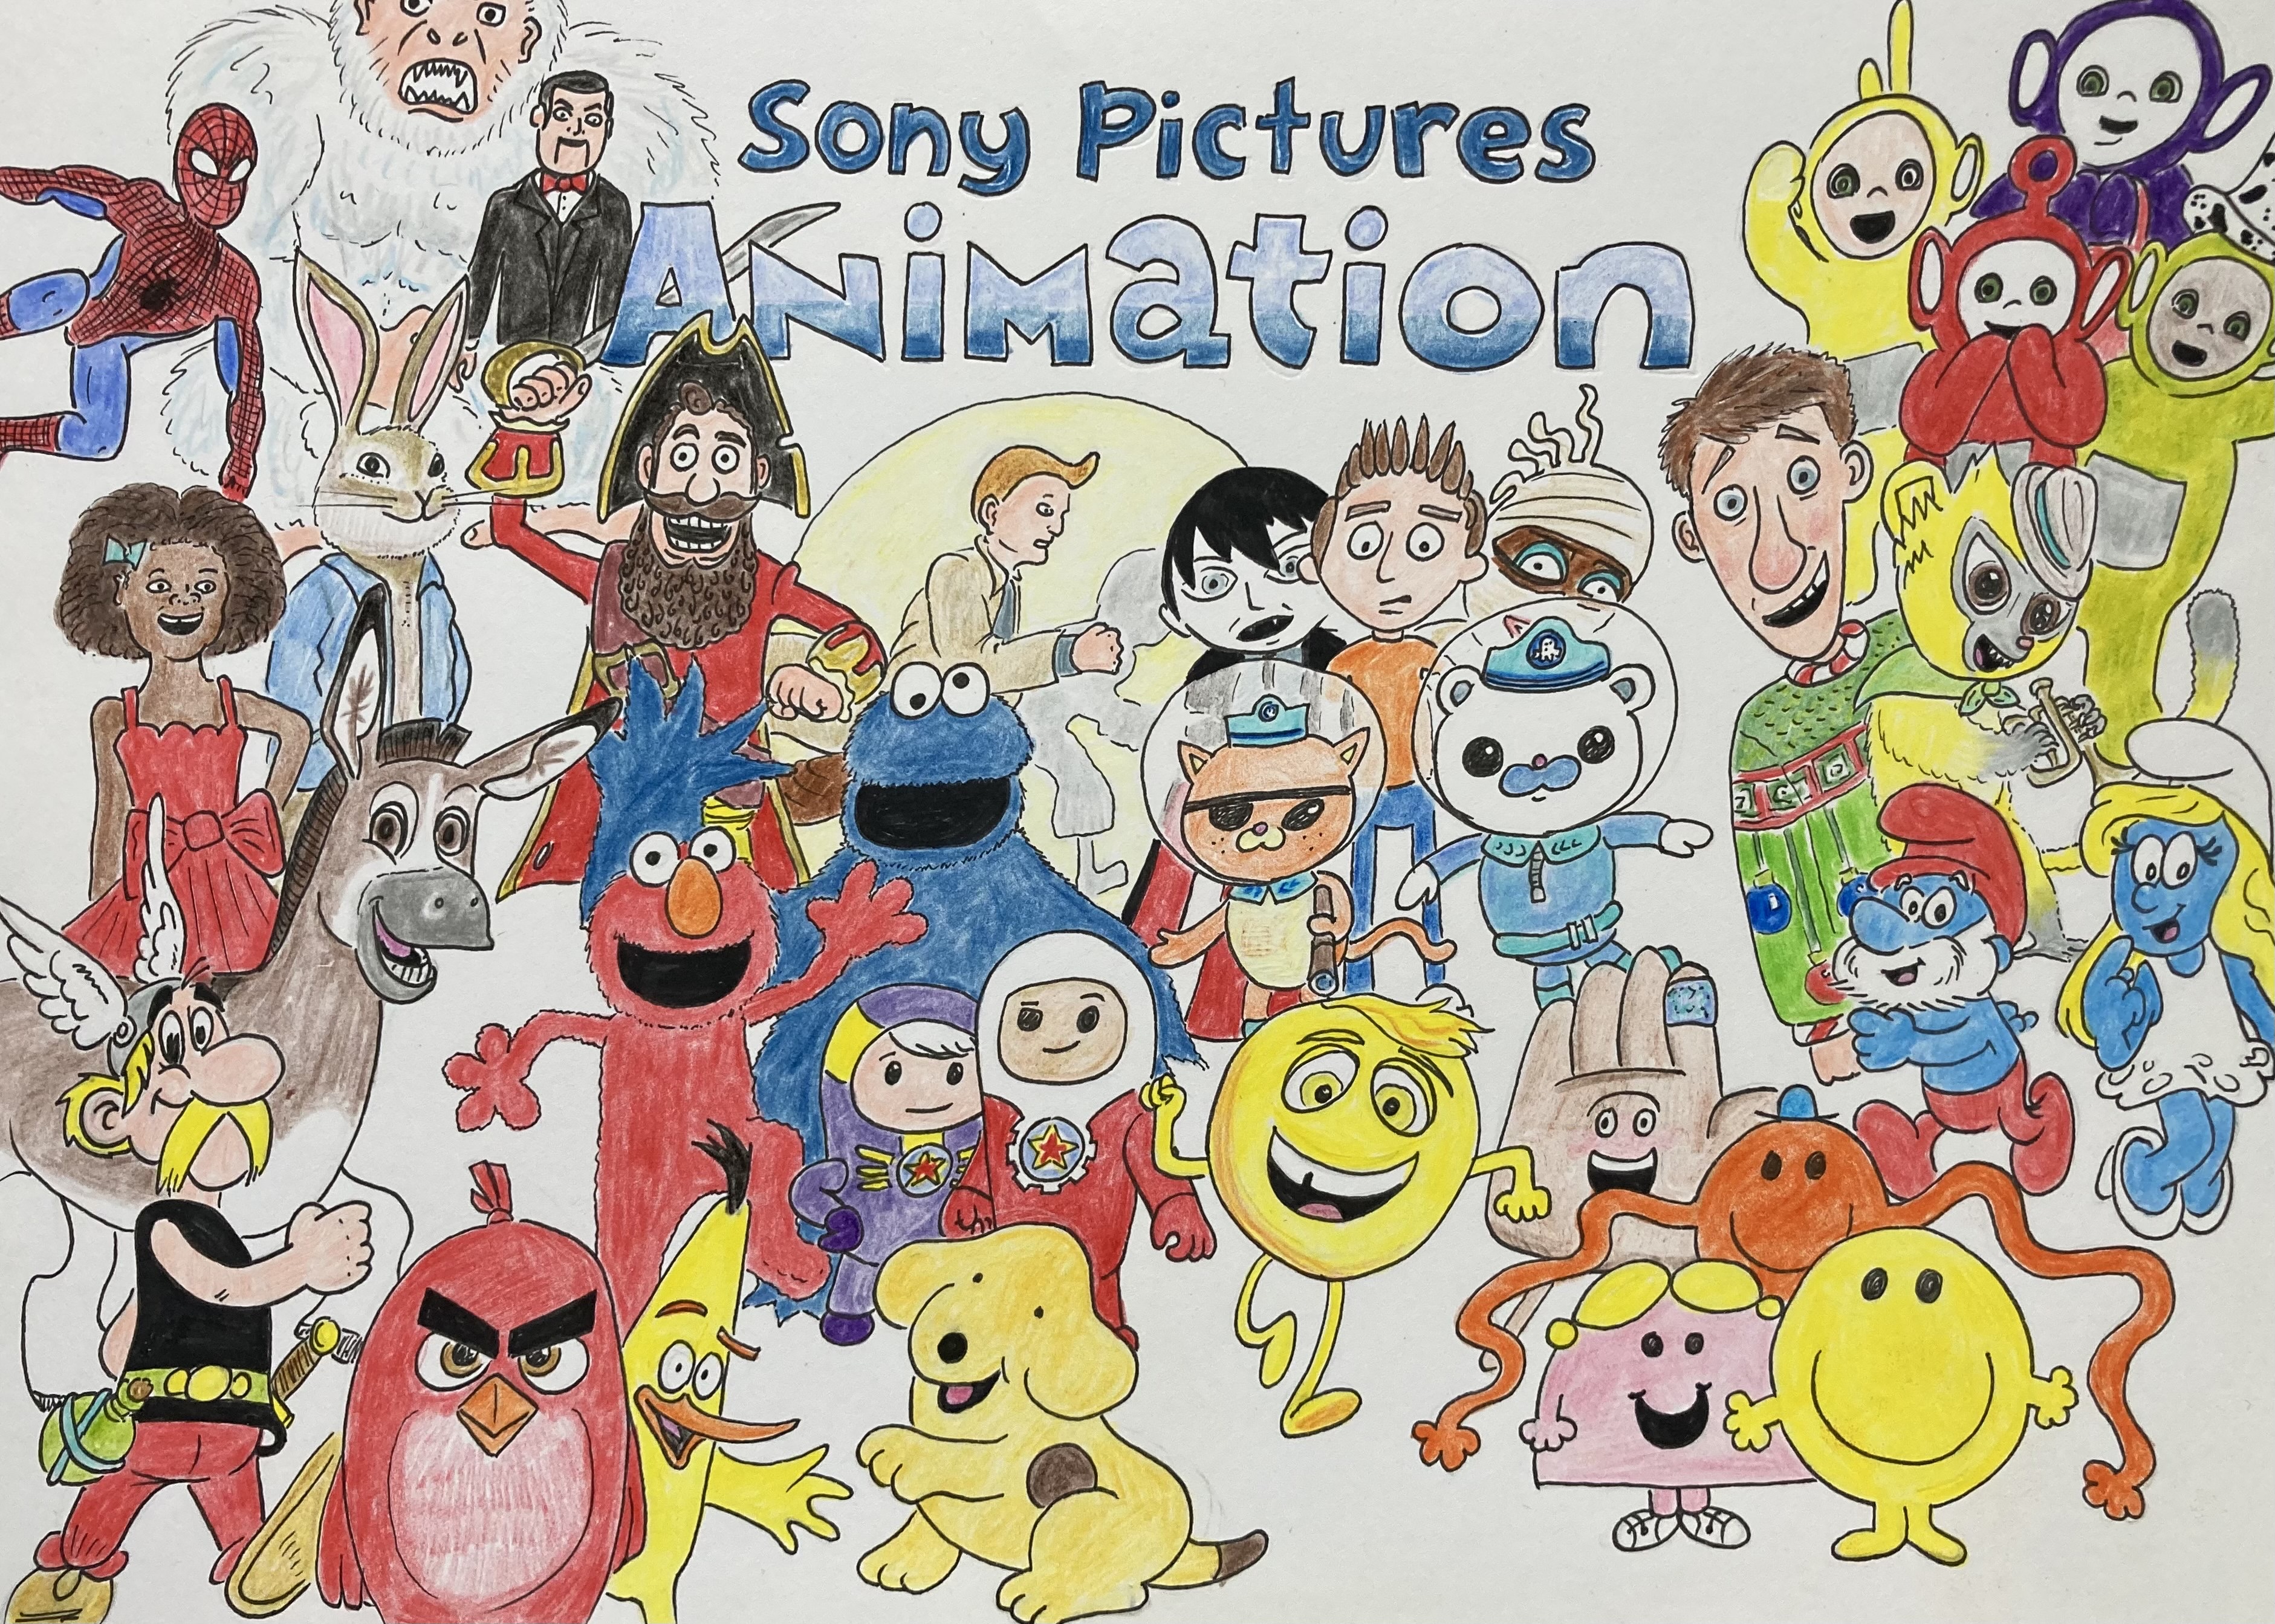 Sony Pictures Animation Collection by GeordieJim76 on DeviantArt